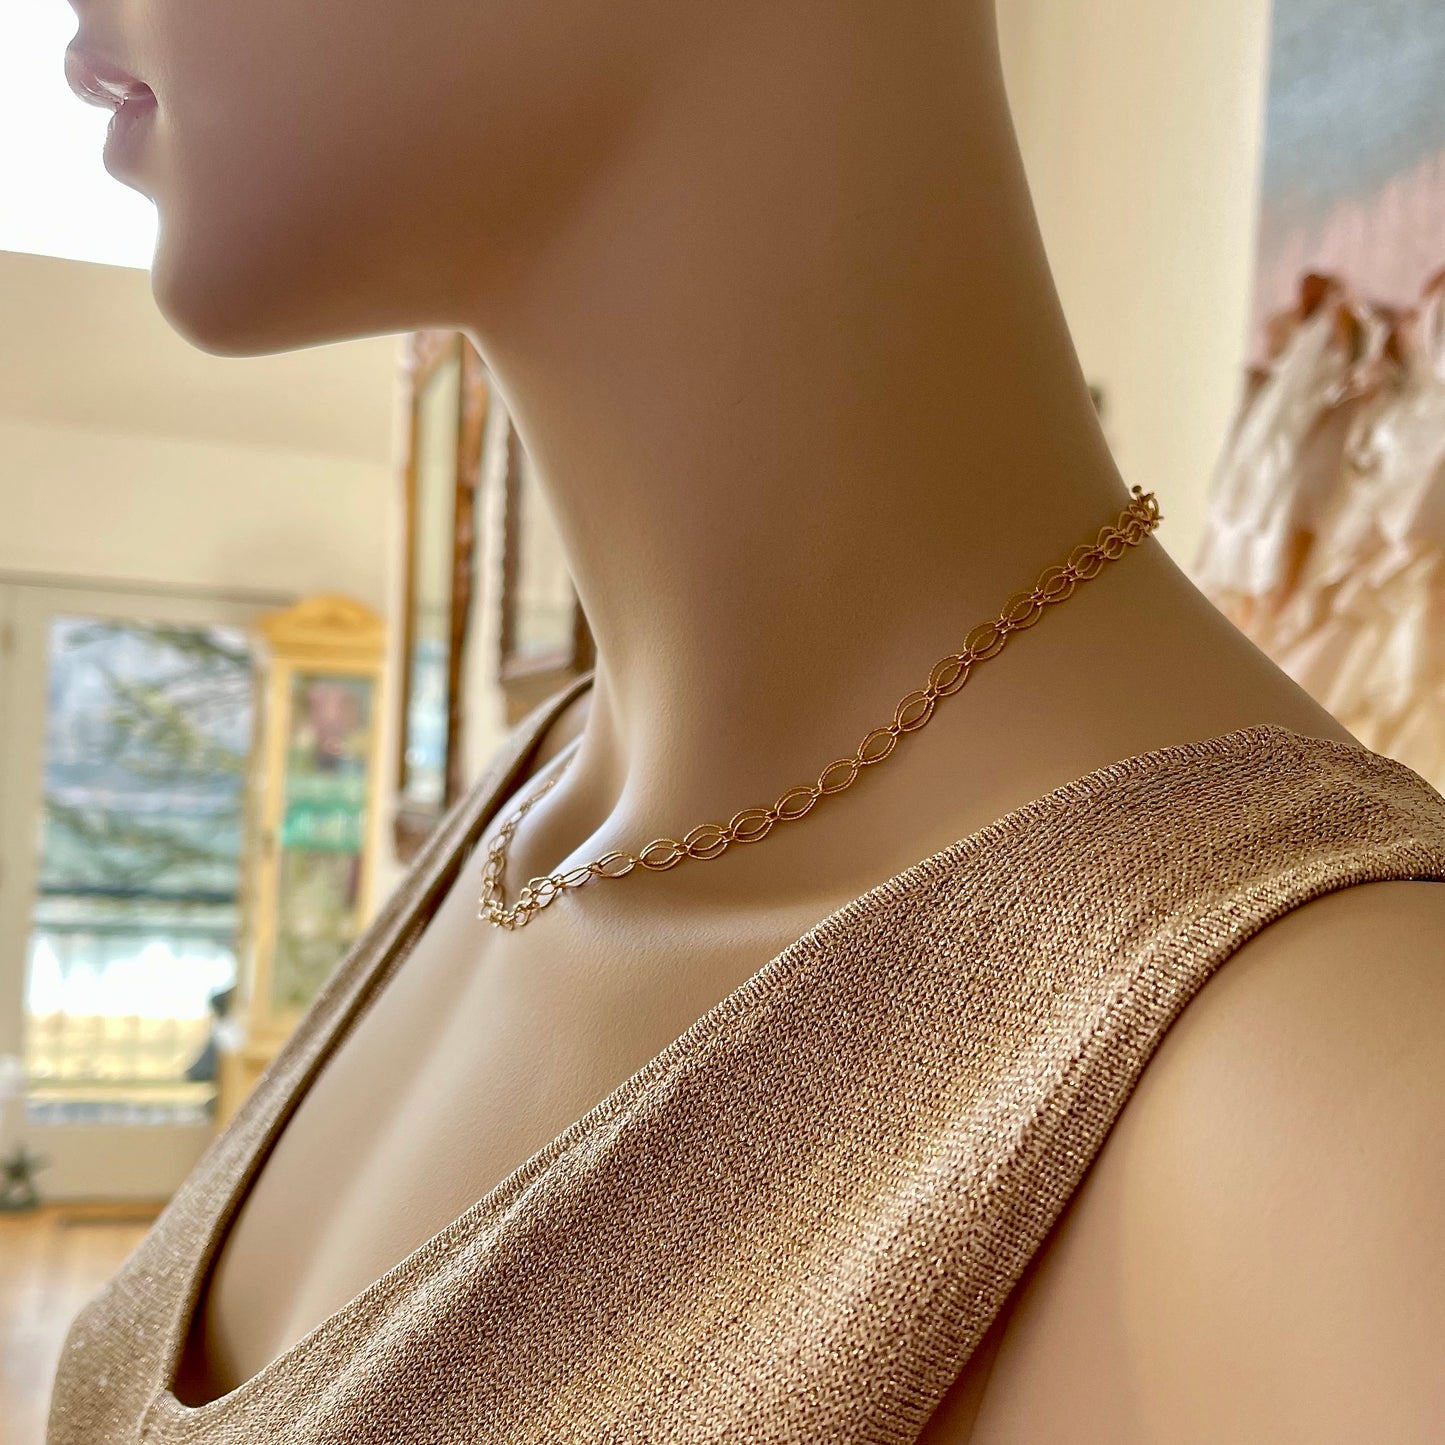 Side View of 14K GF Double Strand Marquise Link Chain Necklace shown full length on mannequin / Arpaia